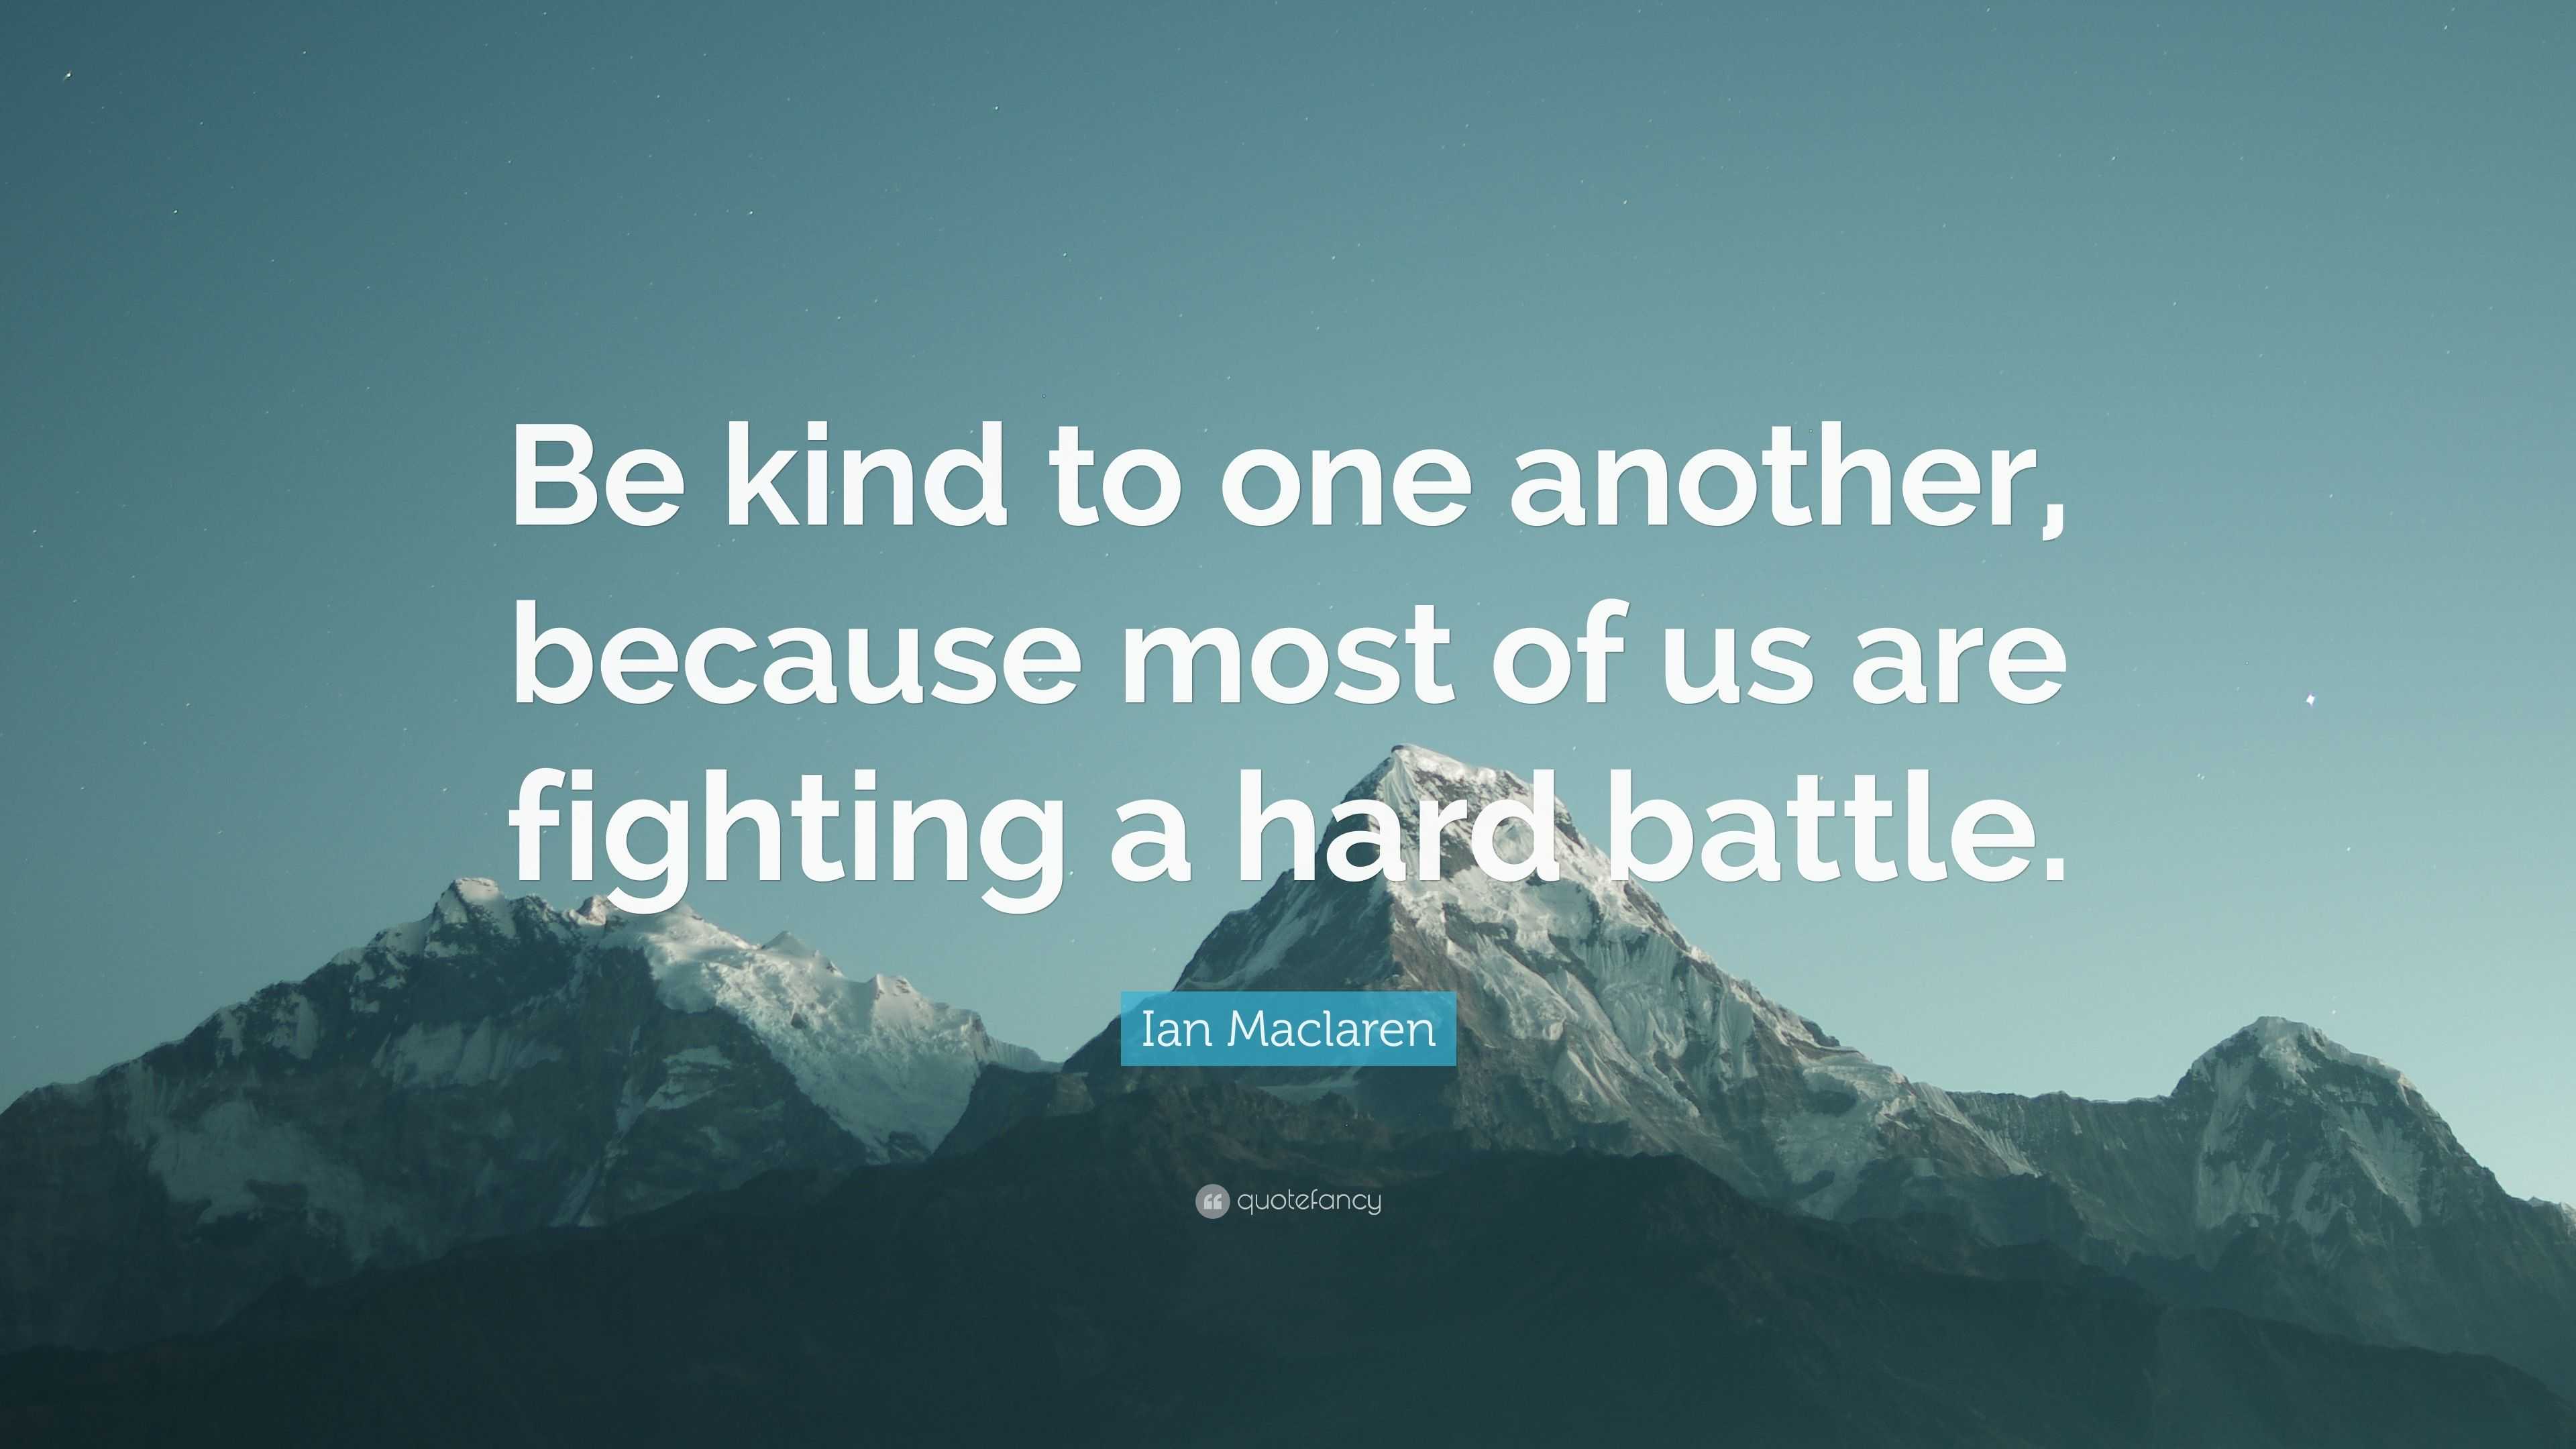 Ian Maclaren Quote: “Be kind to one another, because most of us are ...